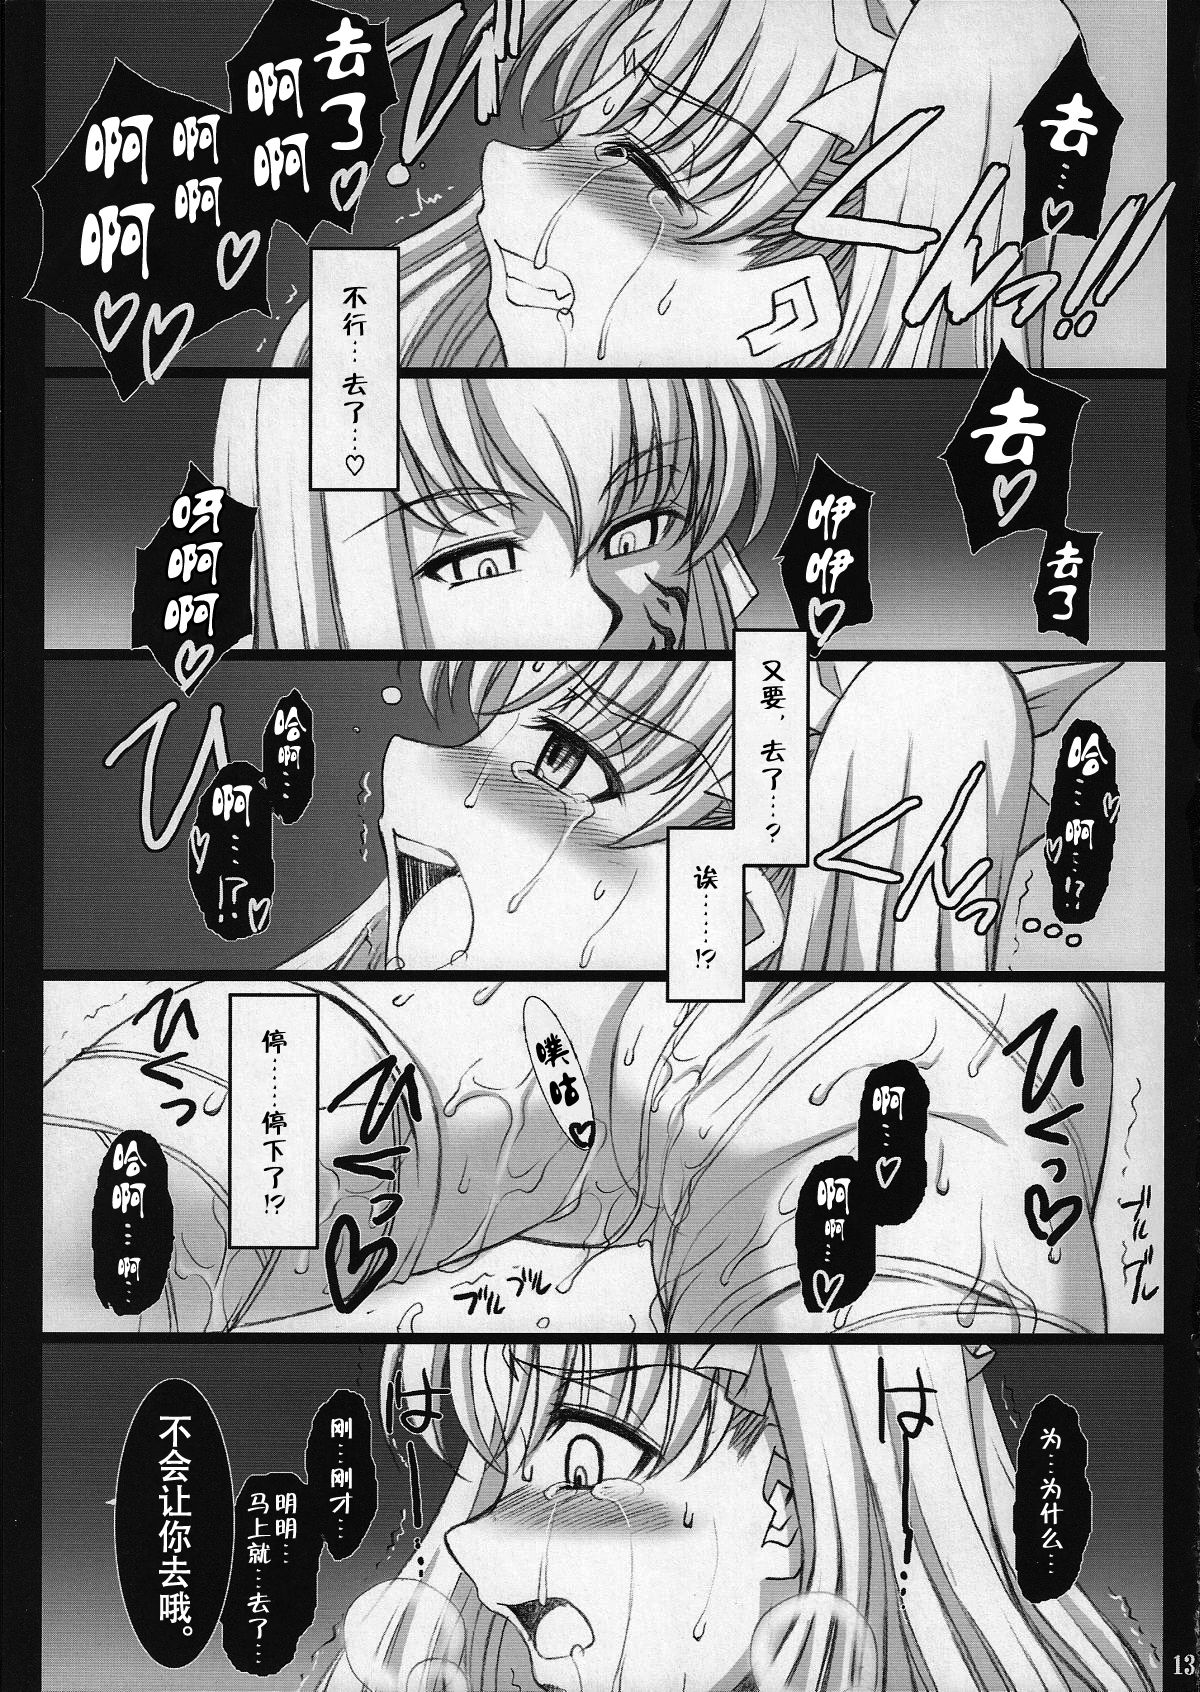 (COMIC1☆2) [H.B (B-RIVER)] Red Degeneration -DAY/3- (Fate/stay night) [Chinese] [不咕鸟汉化组] page 12 full